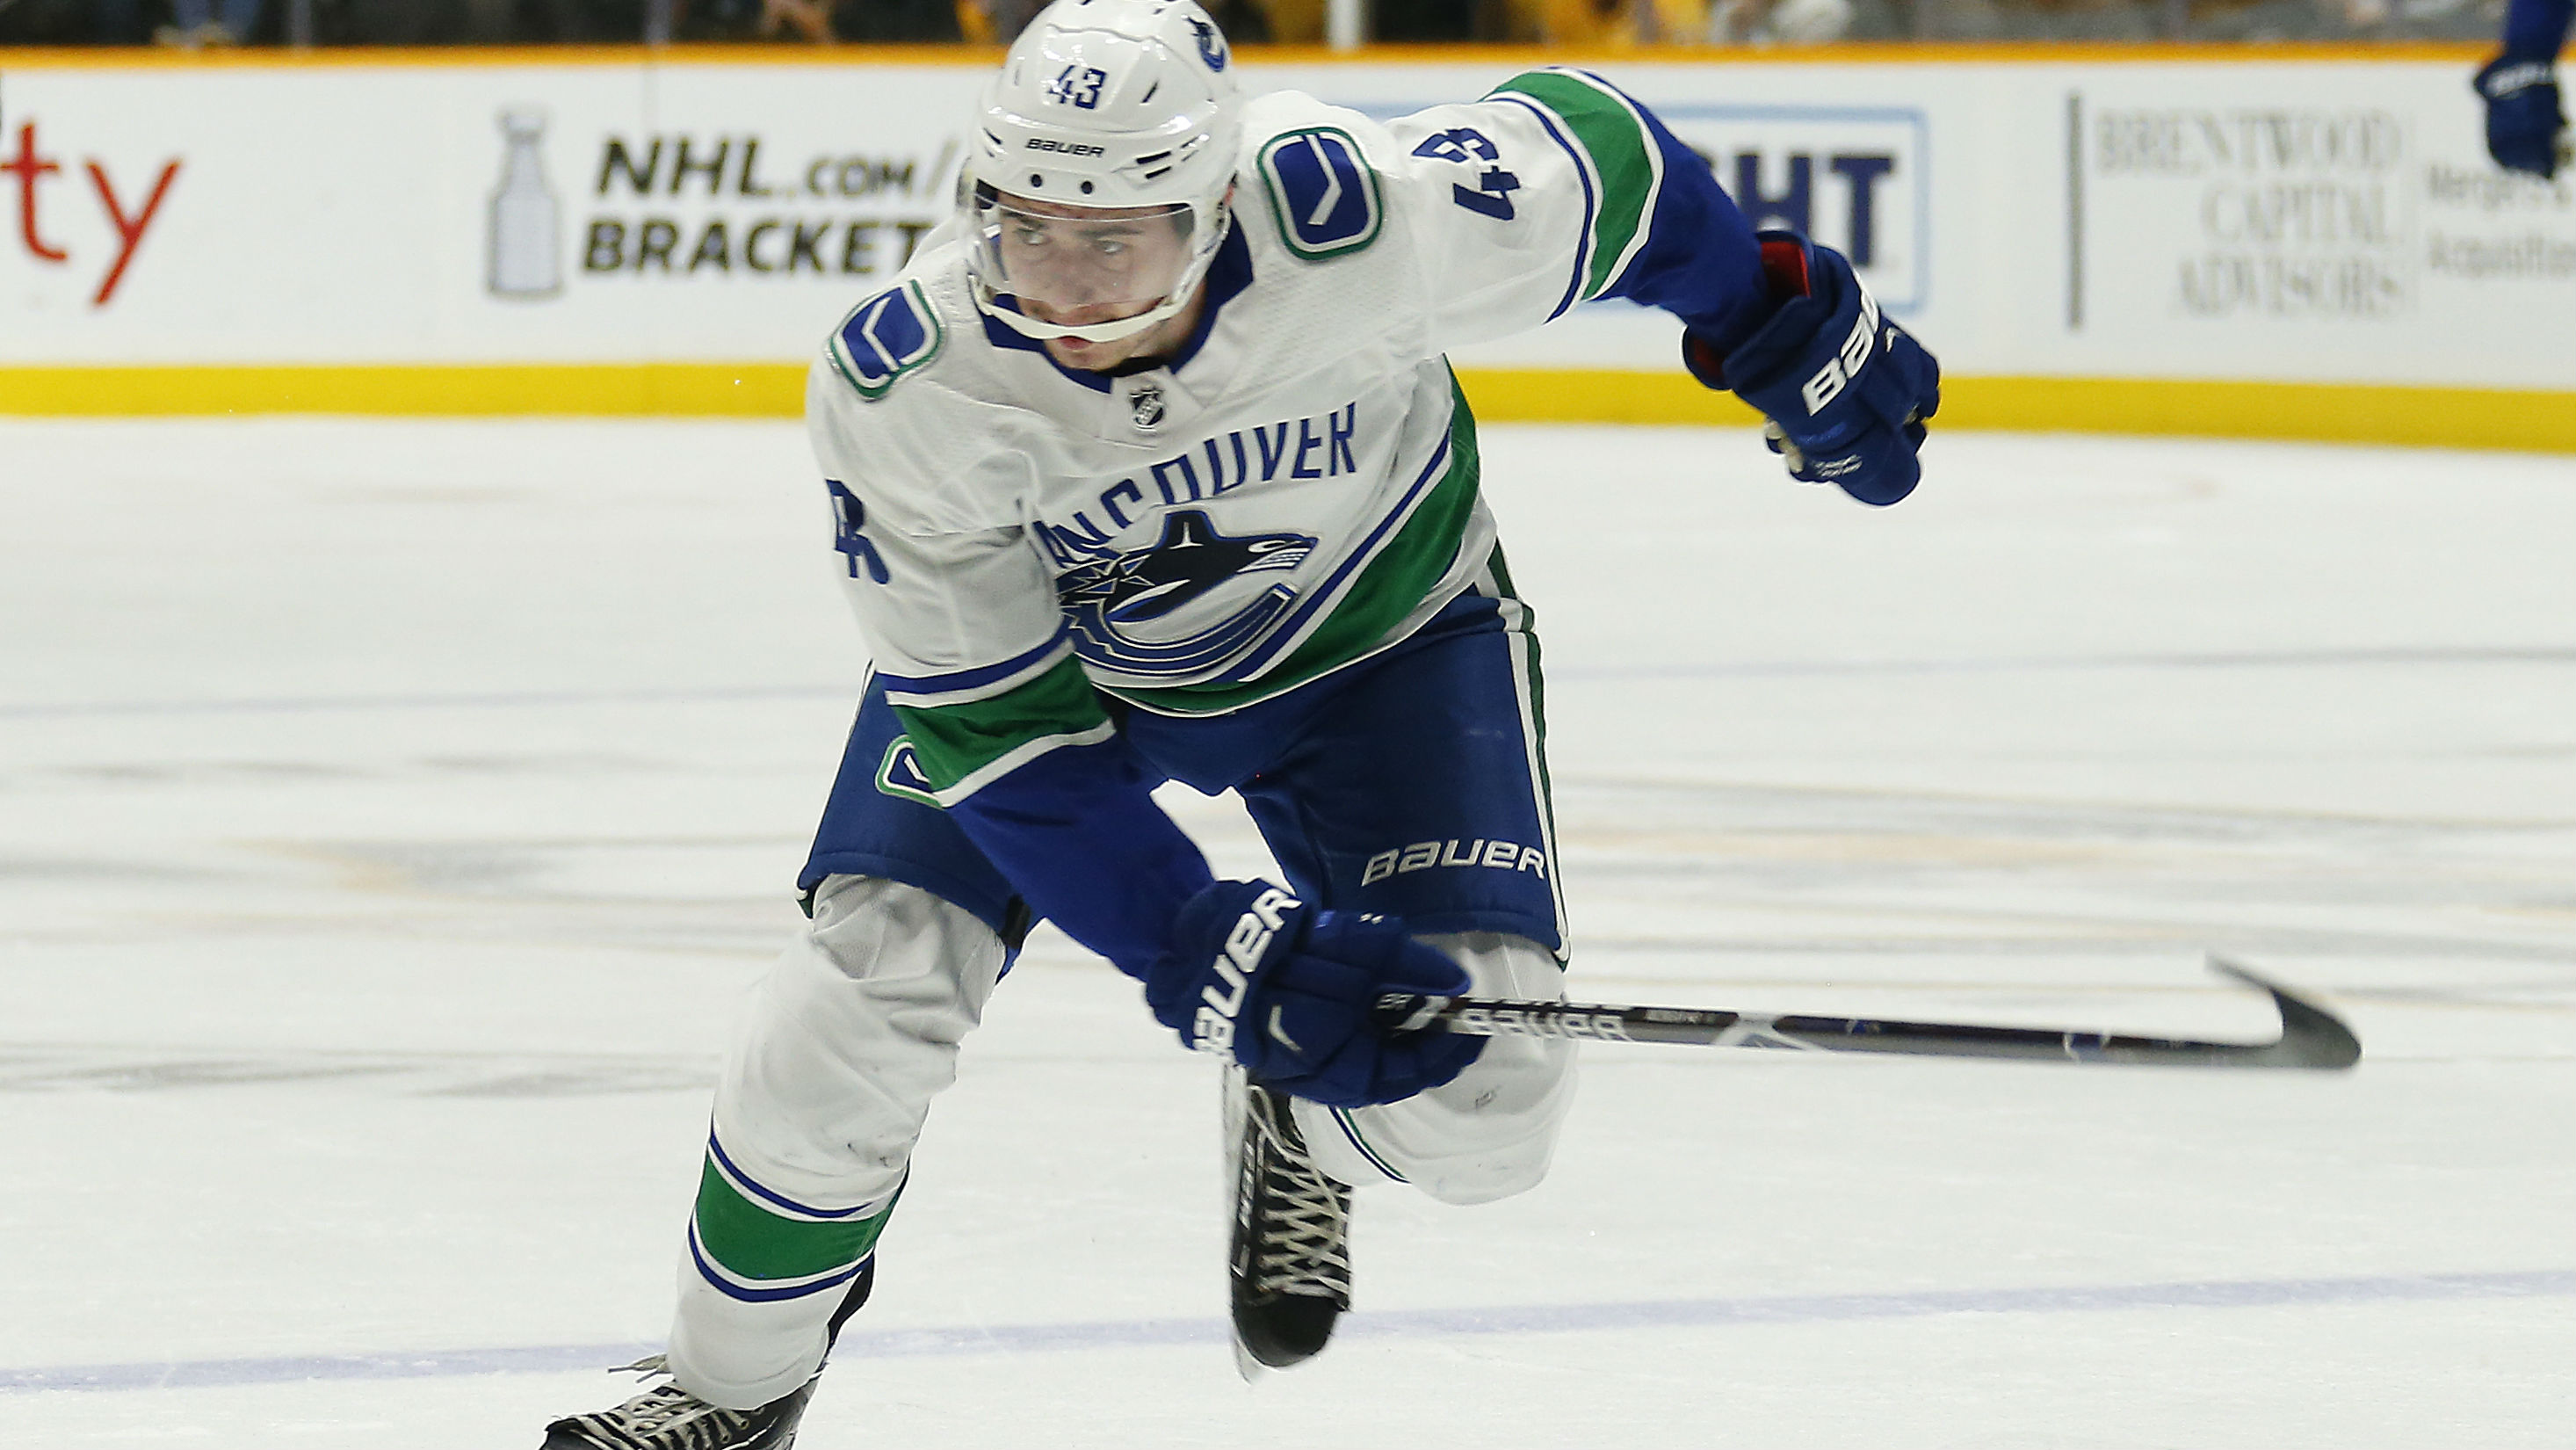 With all eyes on Jack, Canucks' Quinn Hughes ready to take next step